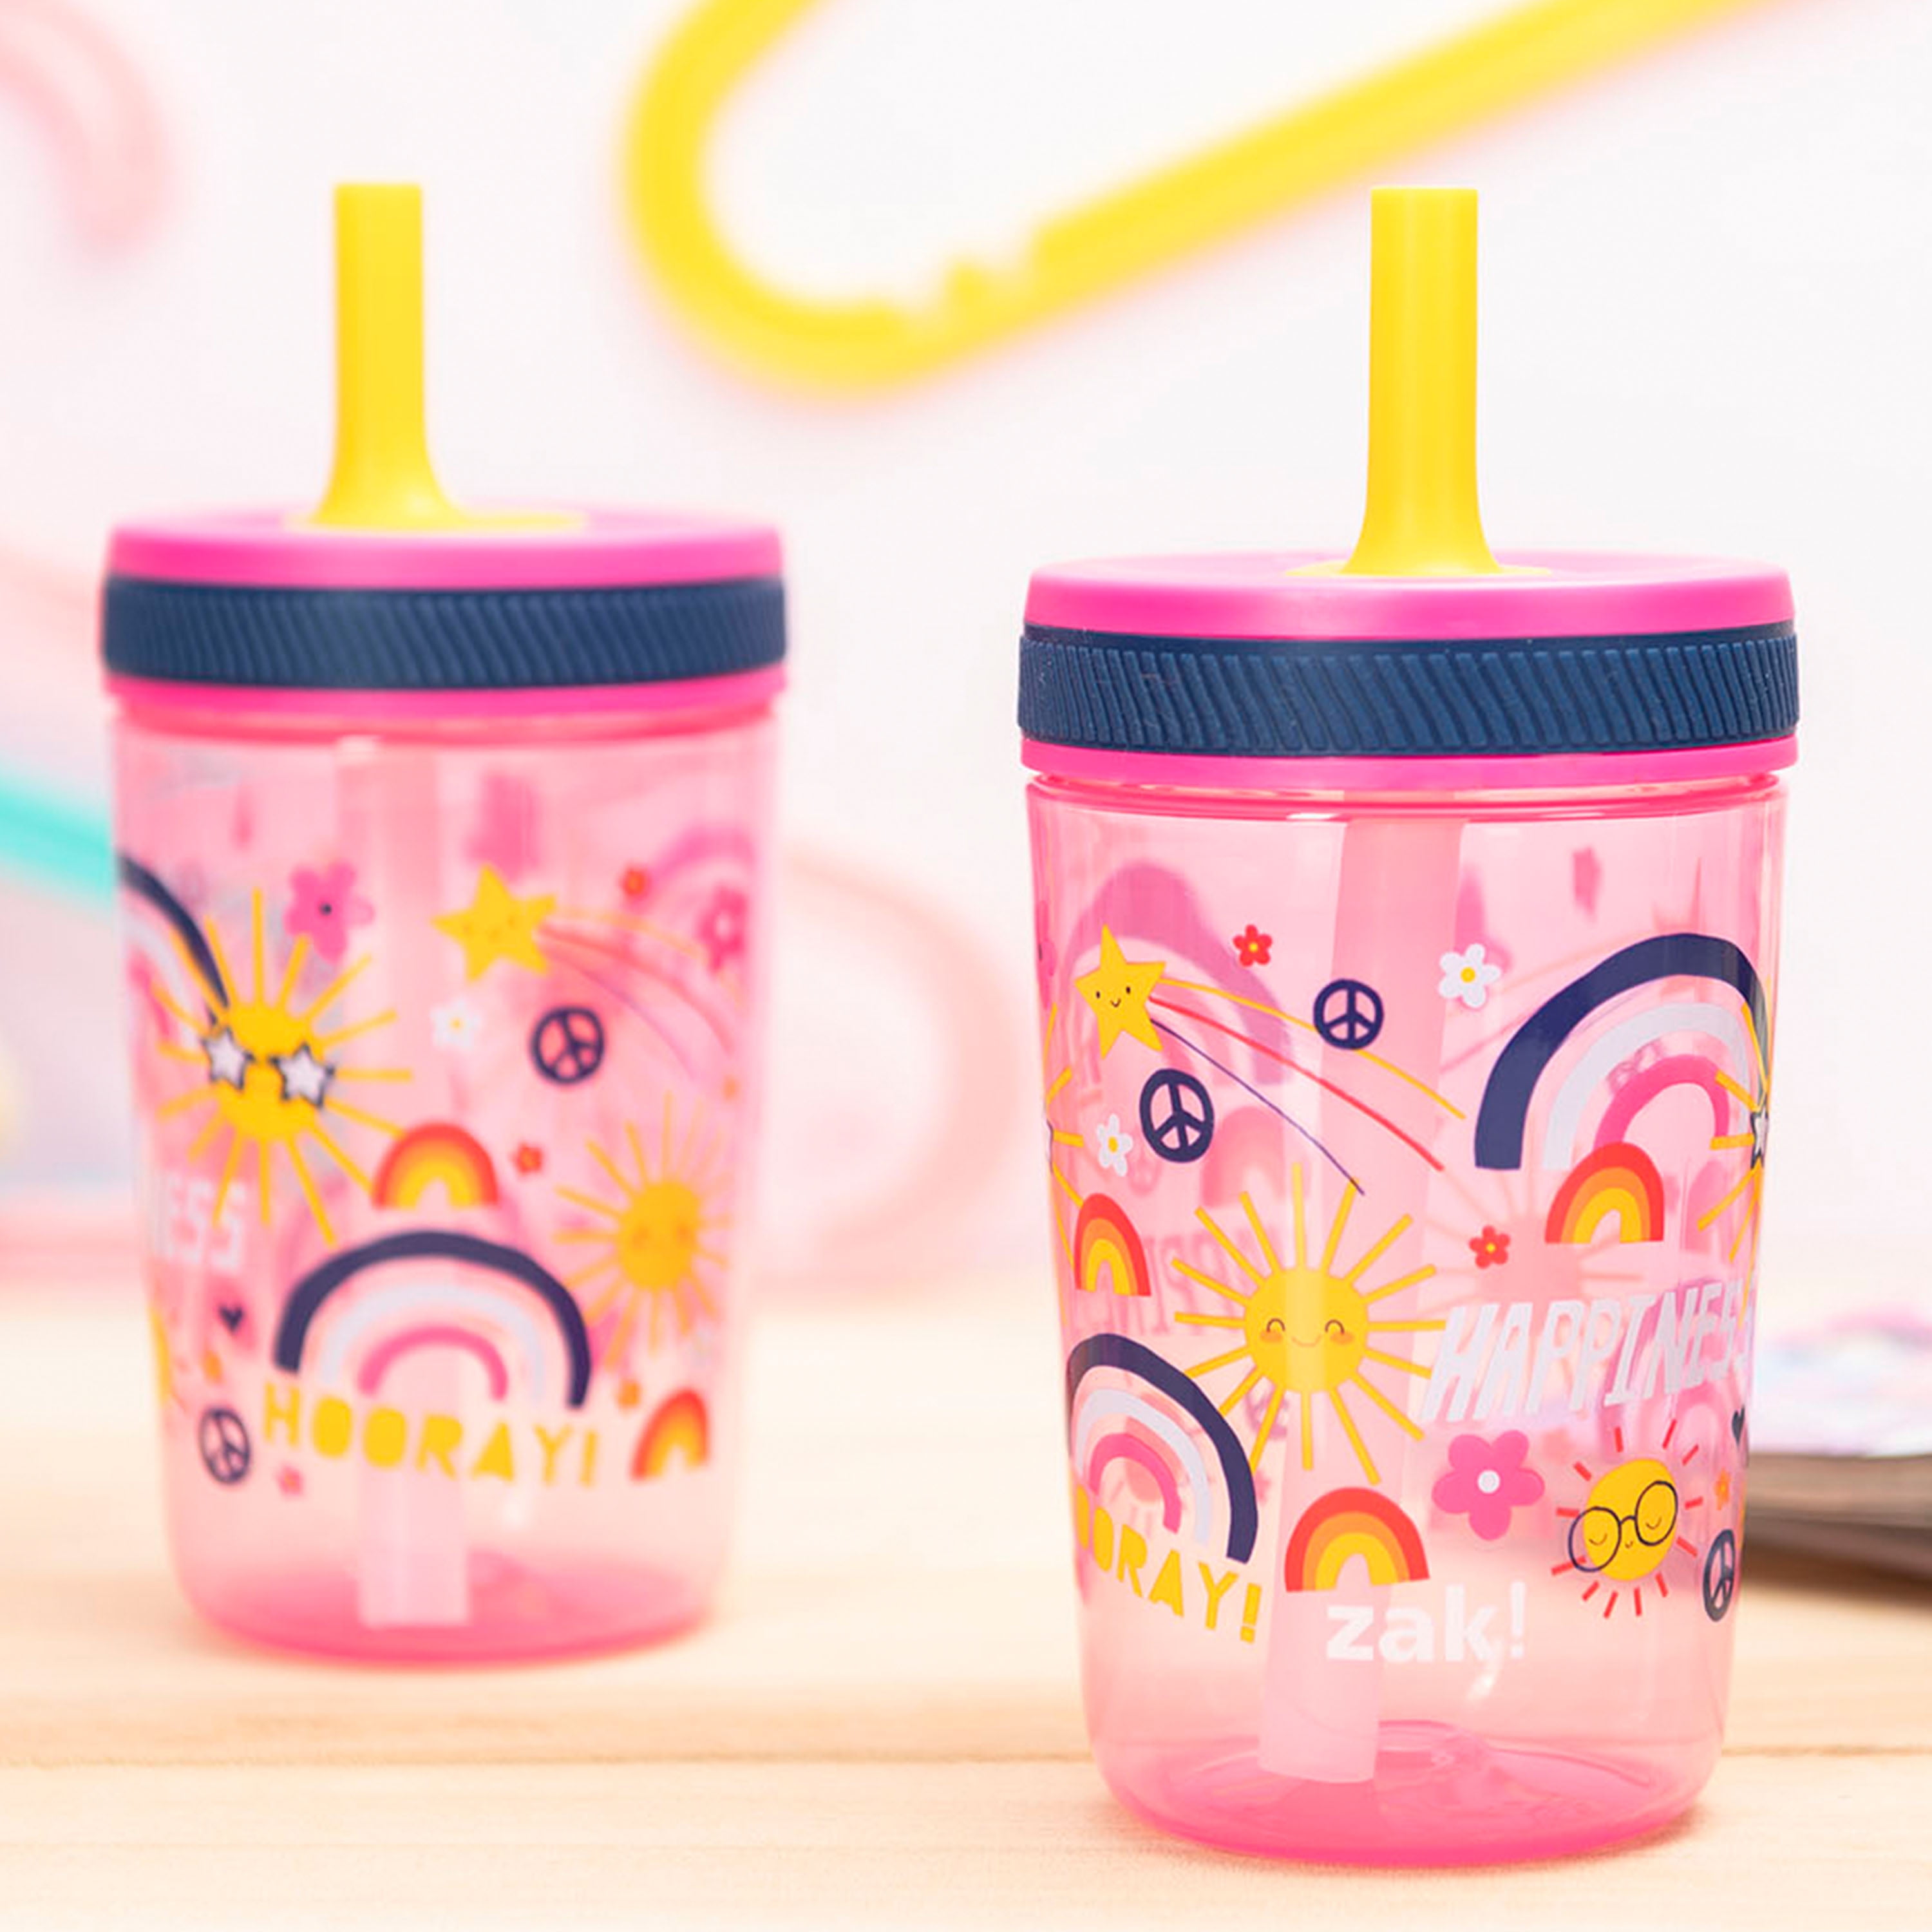 Toy Story Fun Floats Tumbler Cup with Lid and Straw by Zak Designs